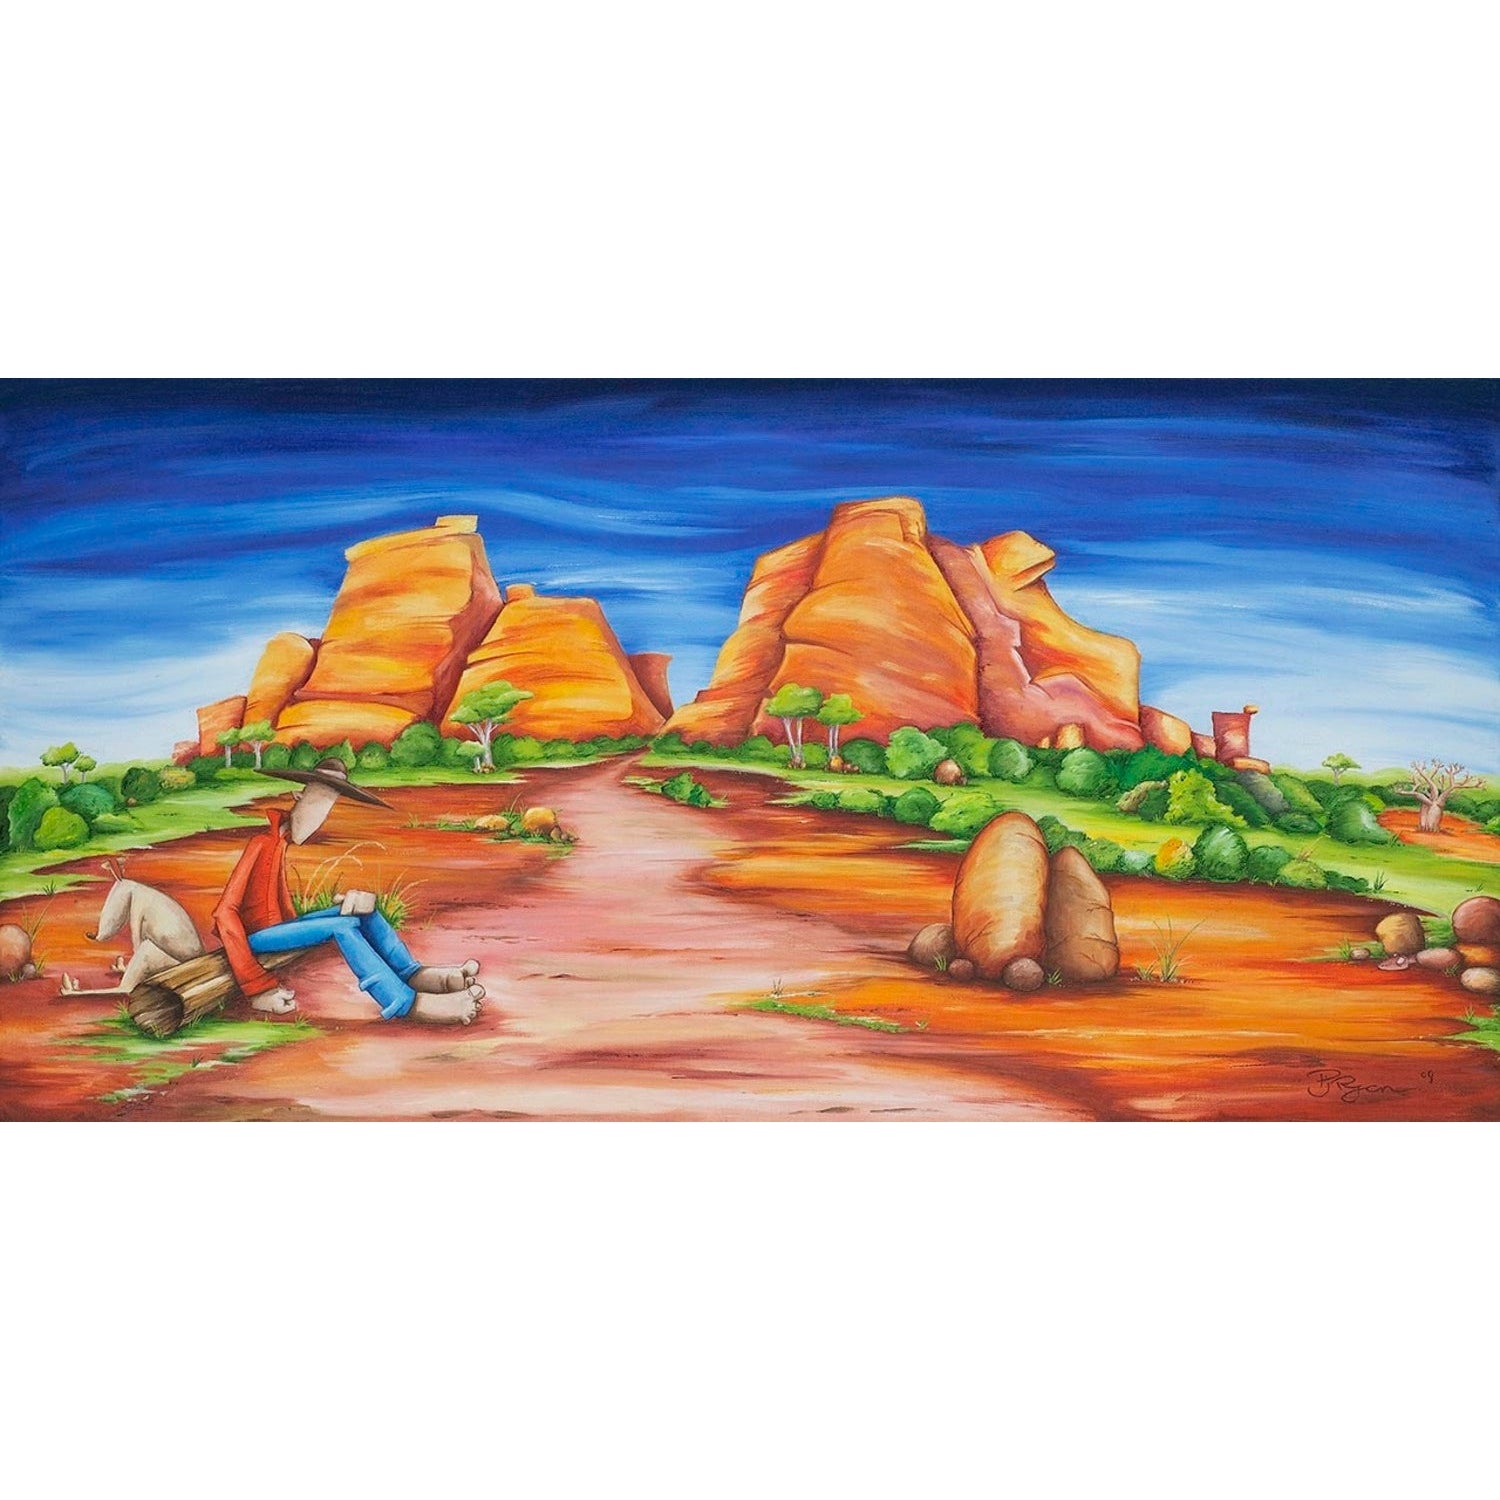 Man at the Olgas - Matted Paper Print